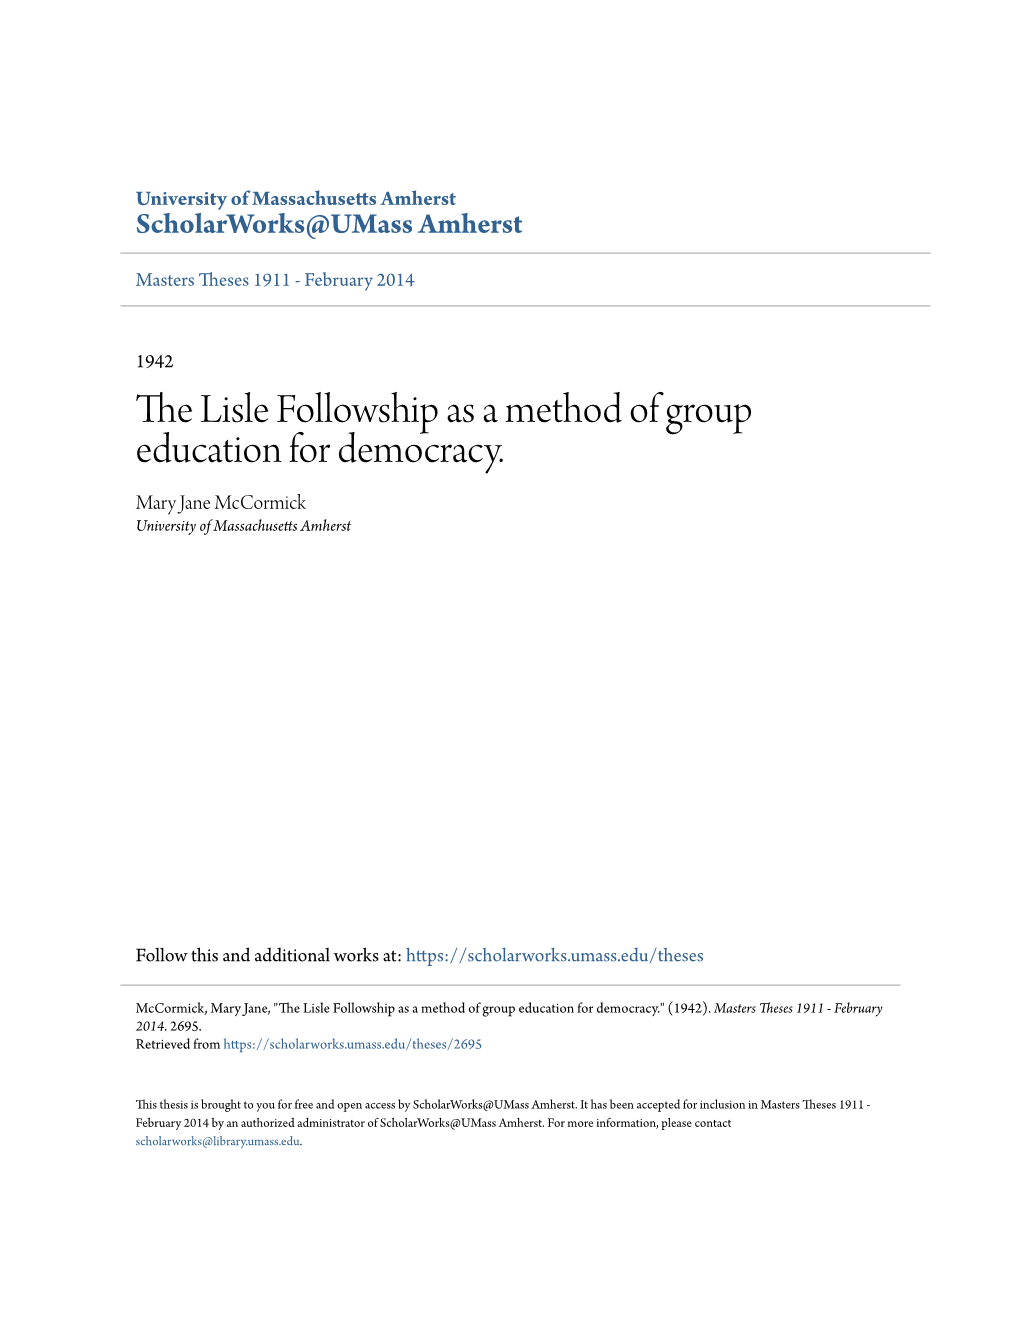 The Lisle Followship As a Method of Group Education for Democracy. Mary Jane Mccormick University of Massachusetts Amherst